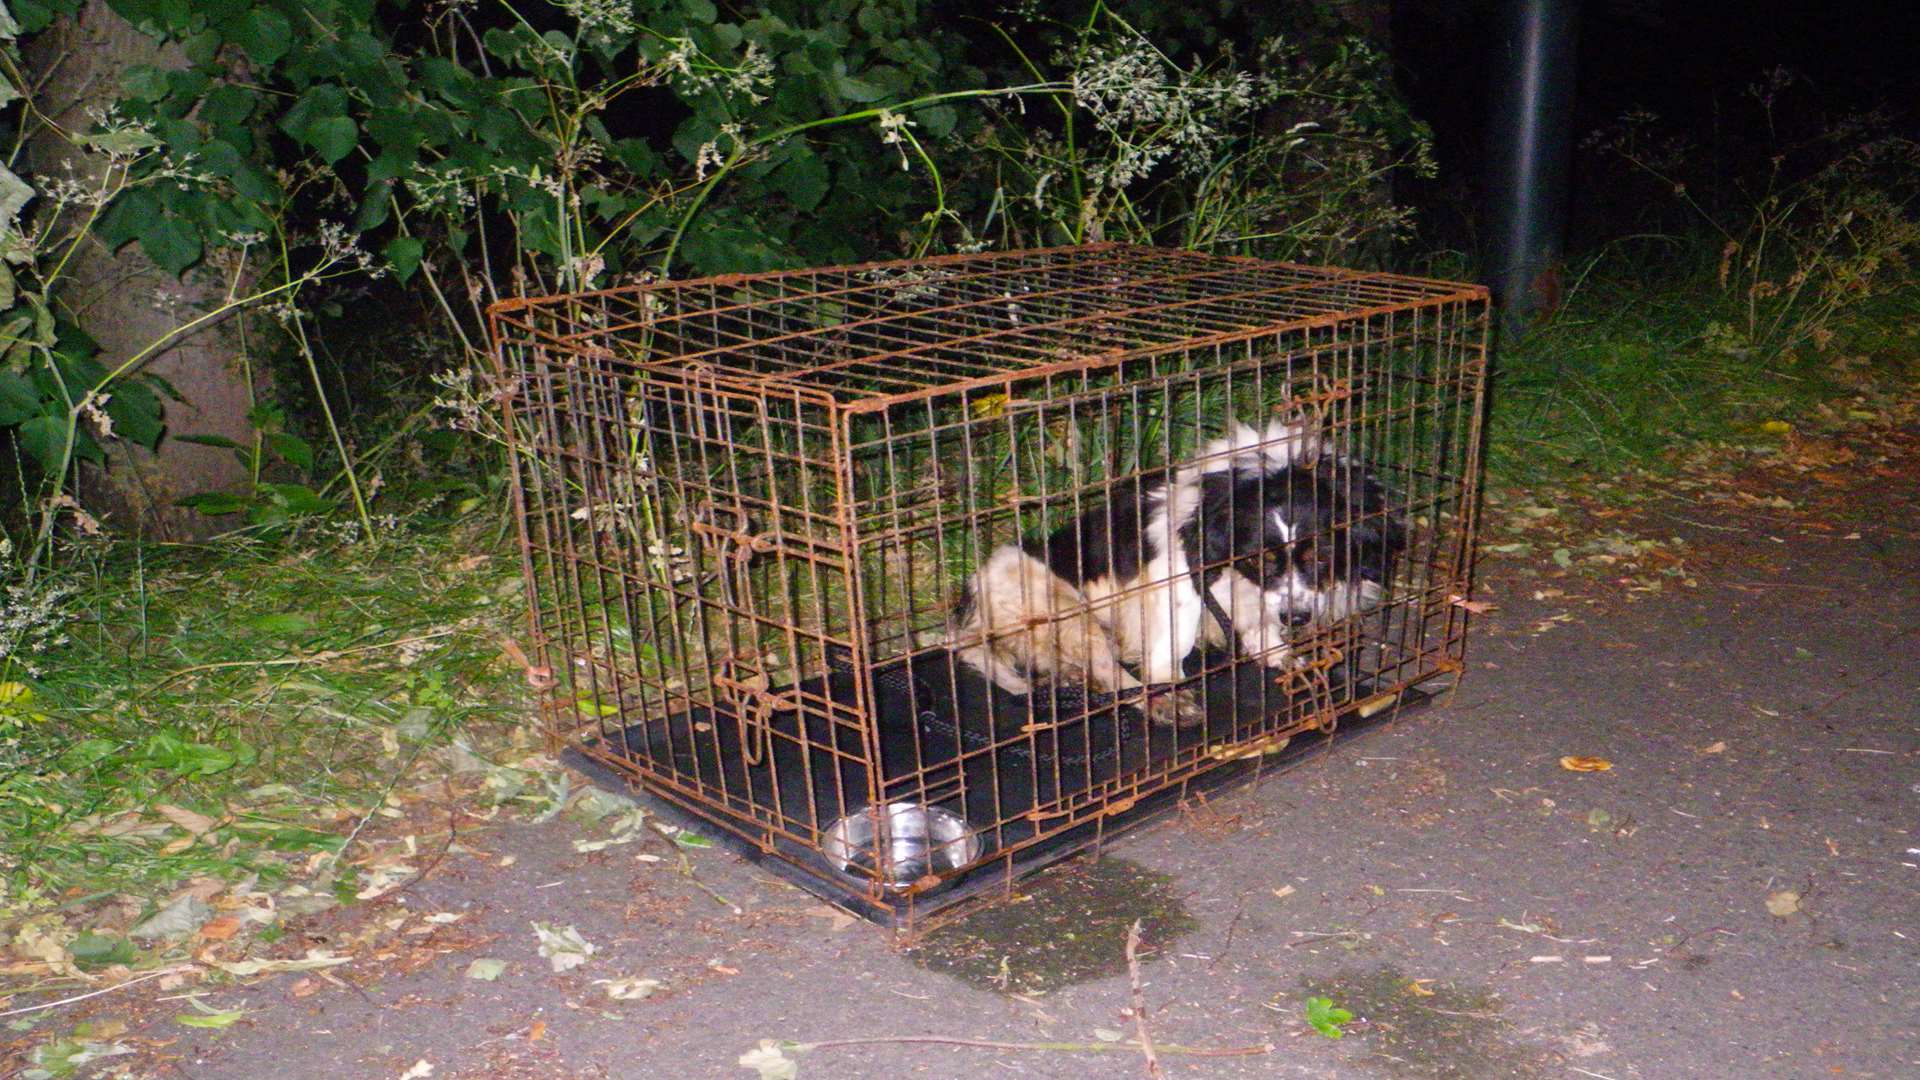 The dog was found in a crate covered in his own urine and faeces after being dumped in a country road near Swanley.